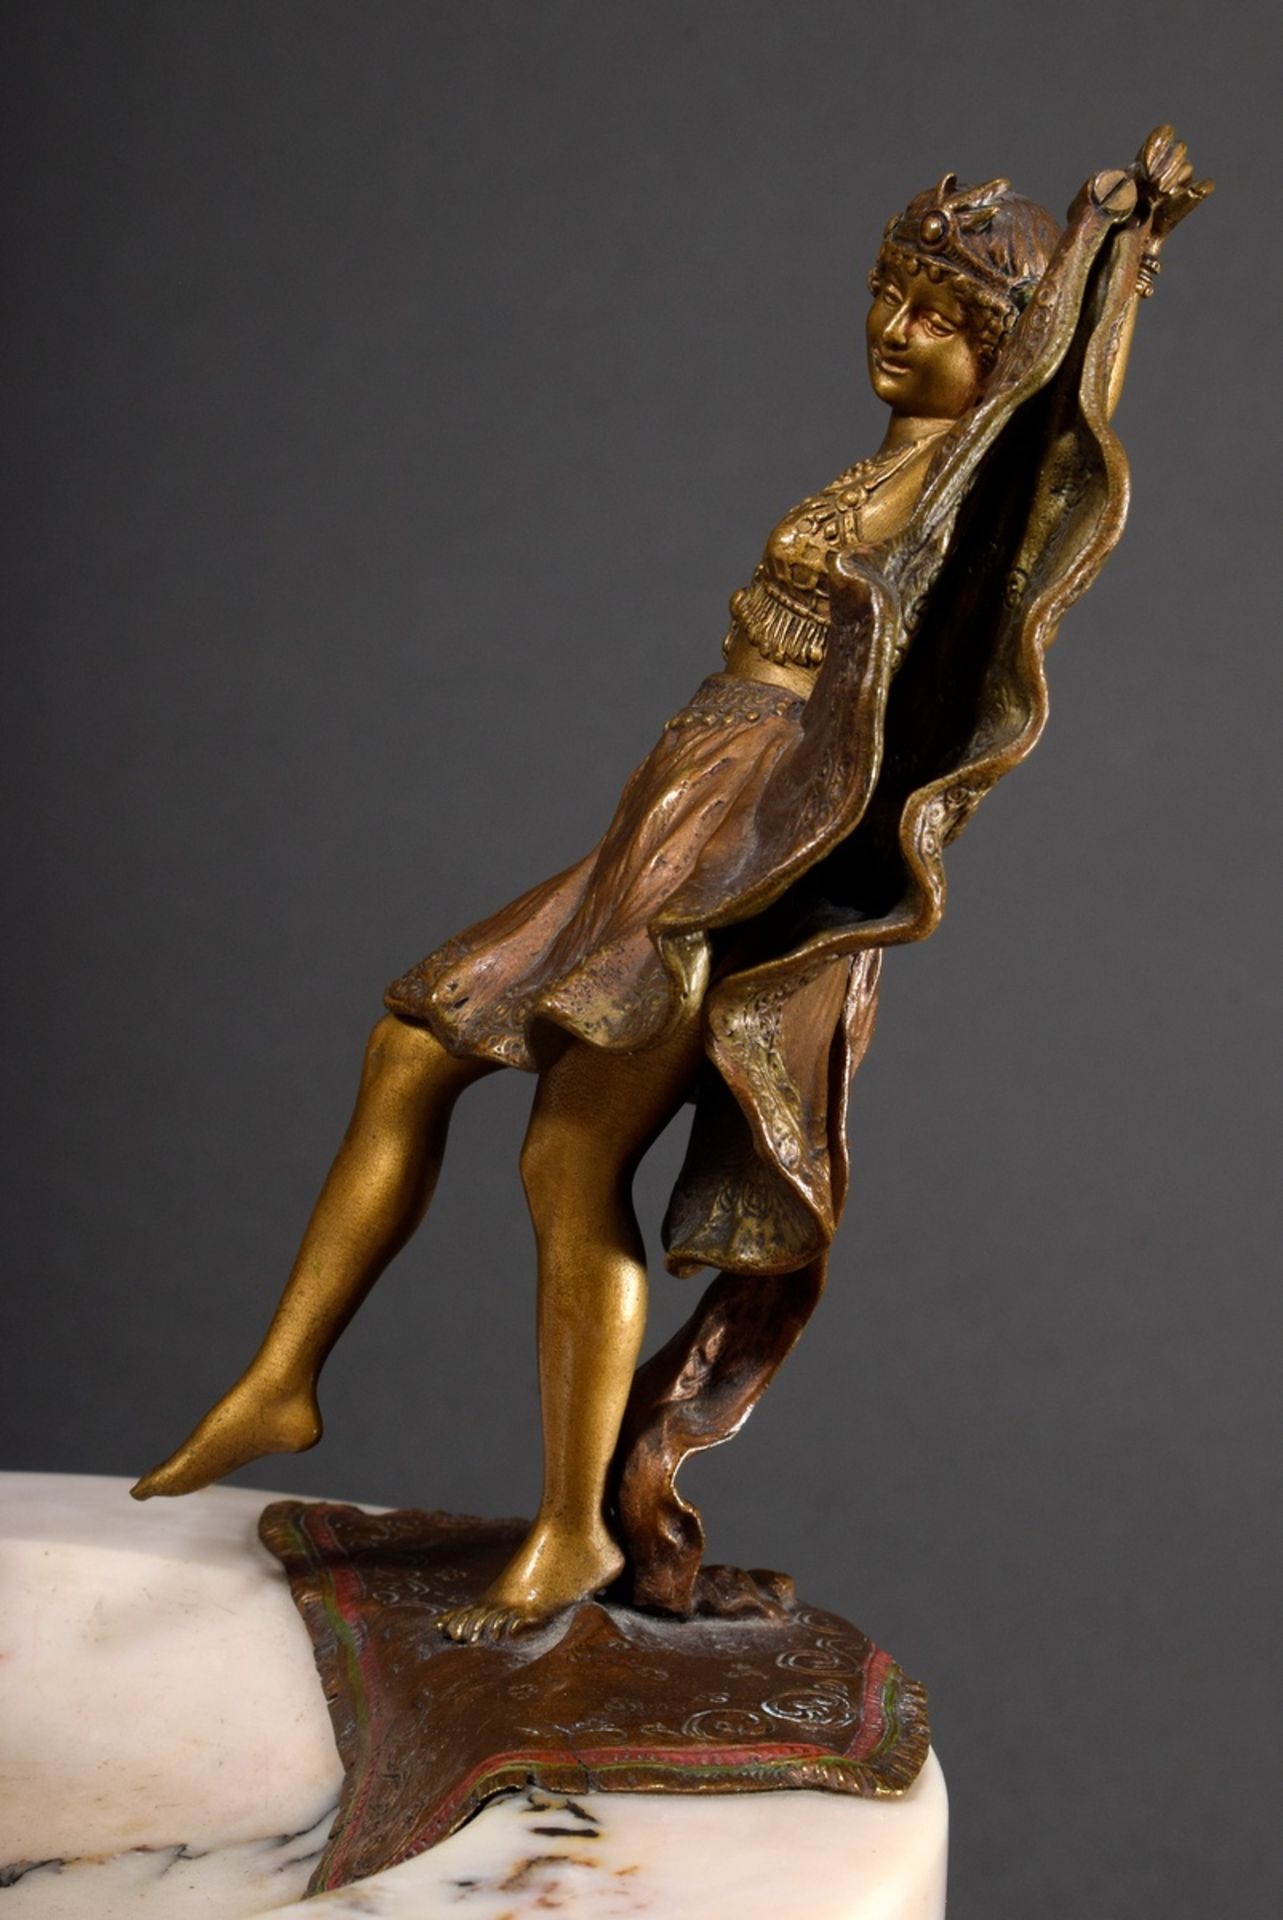 Marble business card tray with Viennese bronze figure "Erotic dancer with folding skirt", discreetl - Image 7 of 9